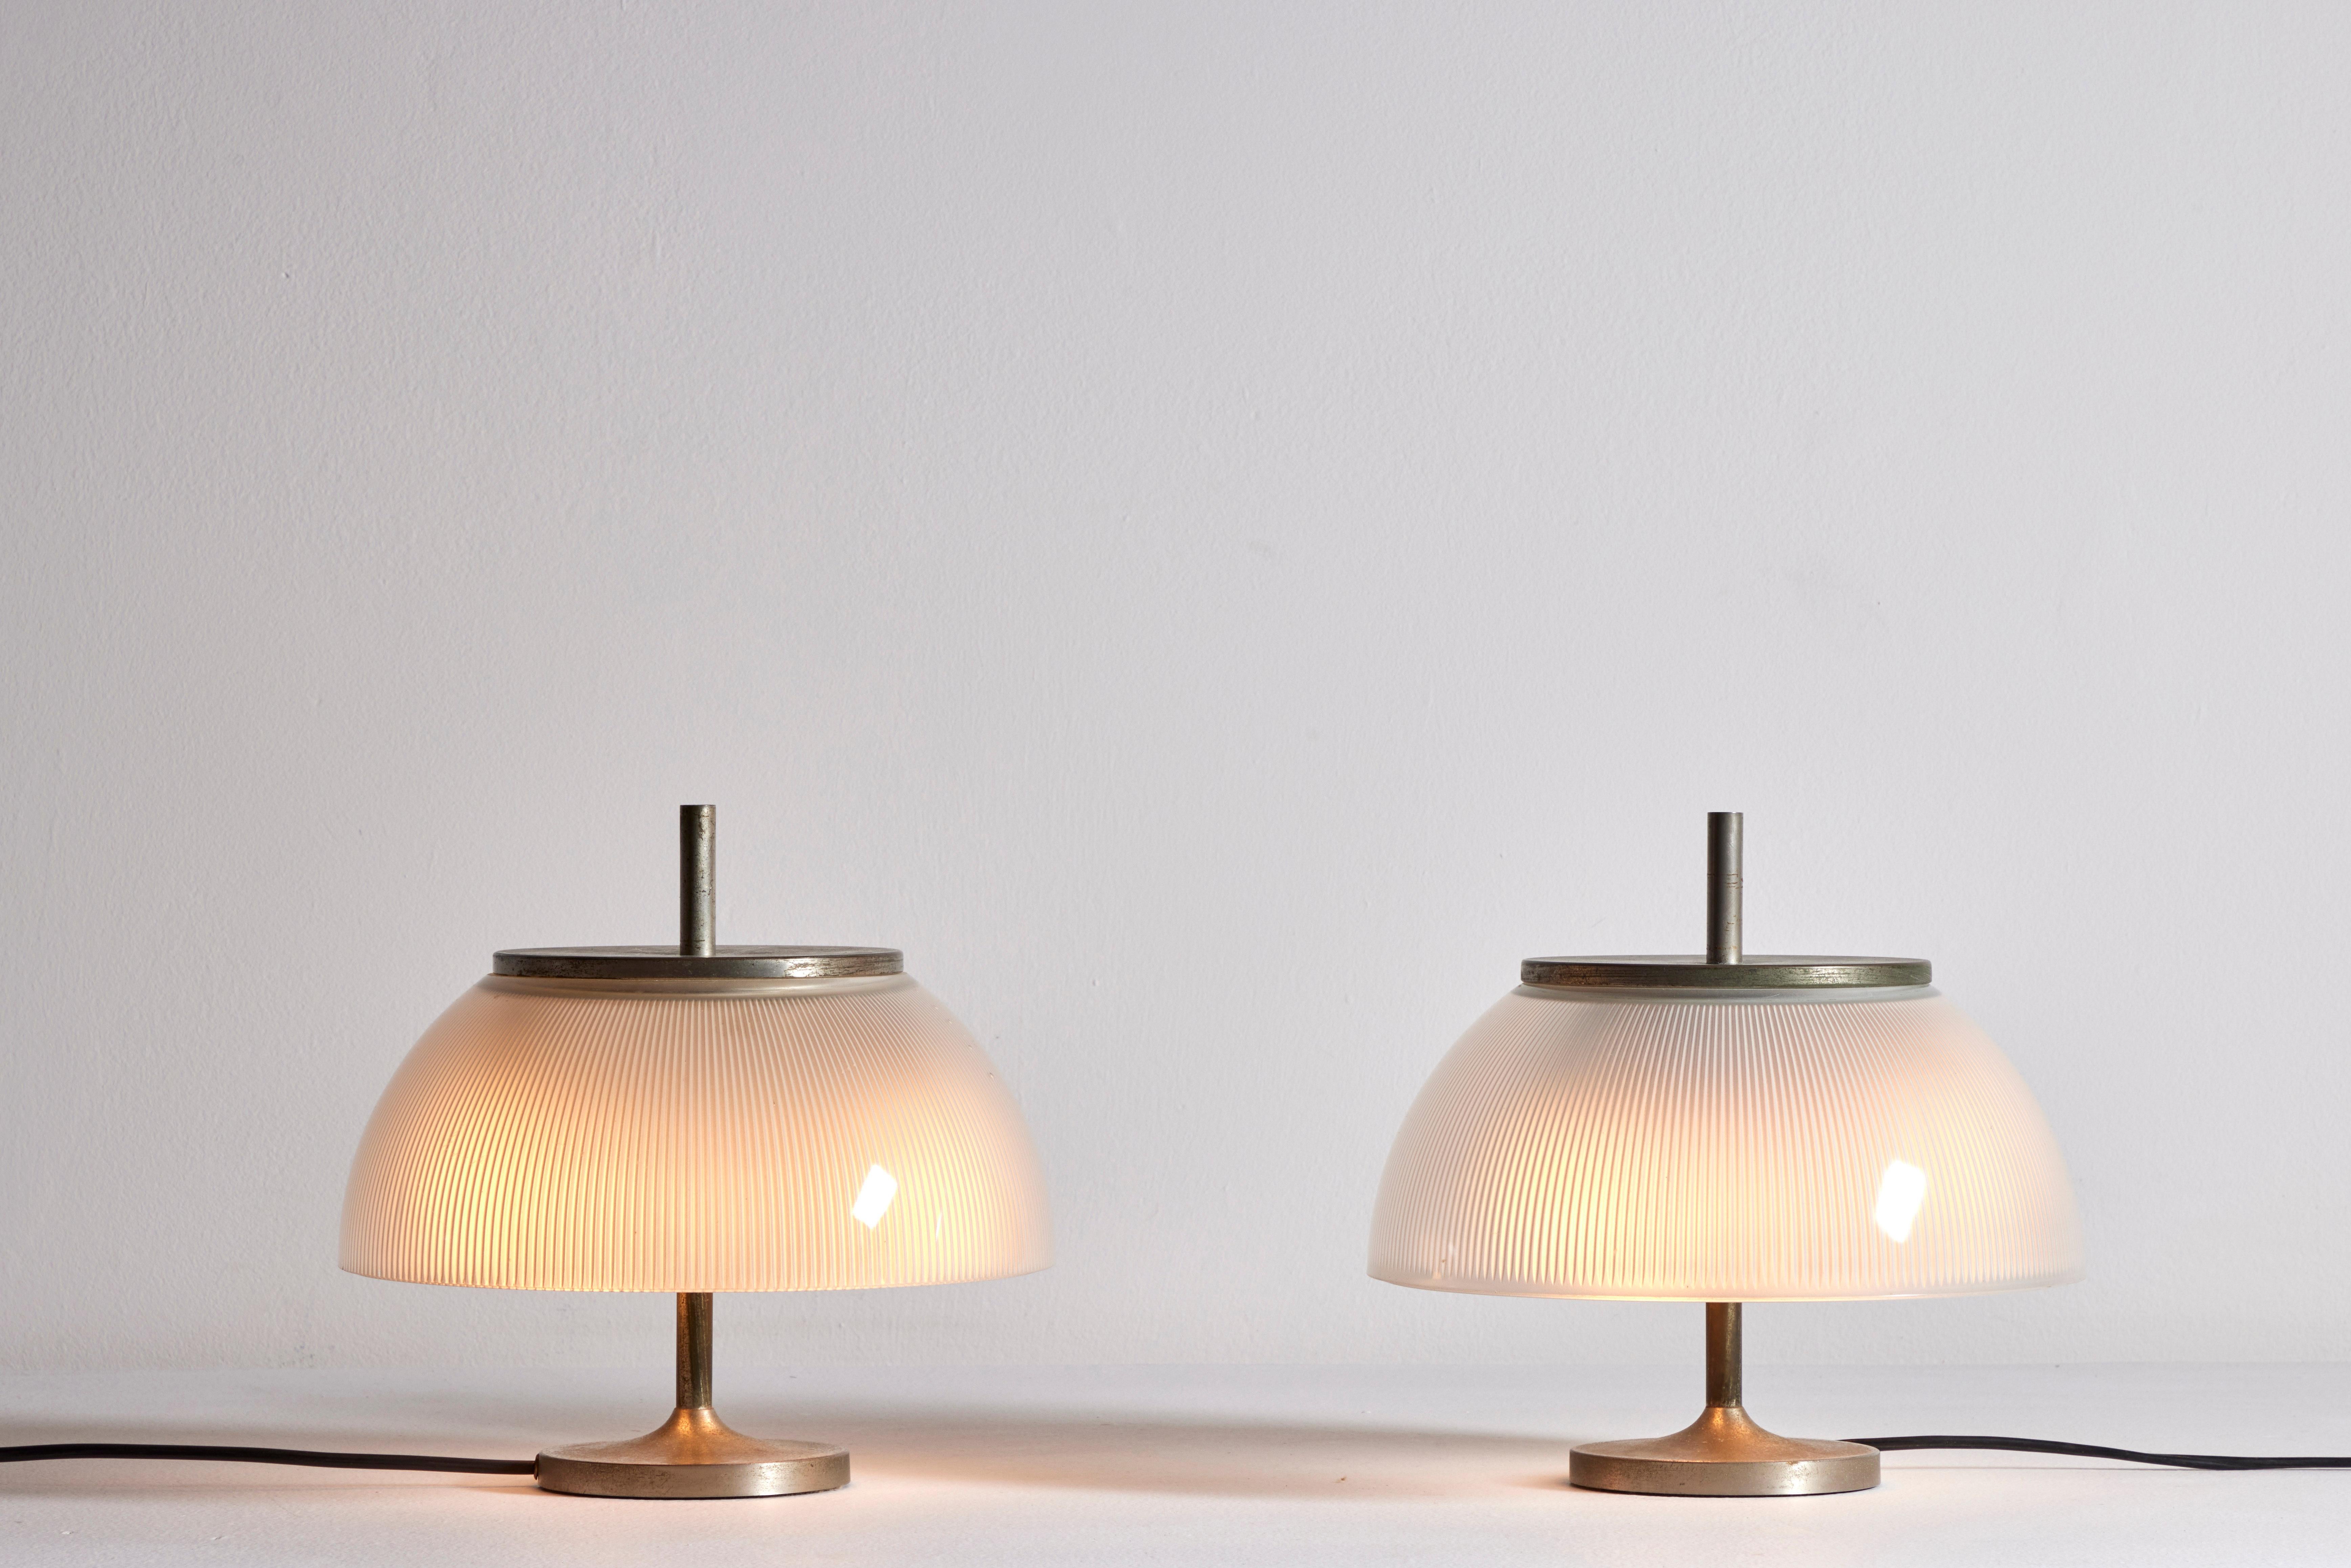 Pair of Alfetta table lamps by Sergio Mazza for Artemide. Designed and manufactured in Italy, circa 1960's. Nickel-plated brass, moulded glass. We recommend two E14 40w maximum bulbs per light. Bulbs not included.